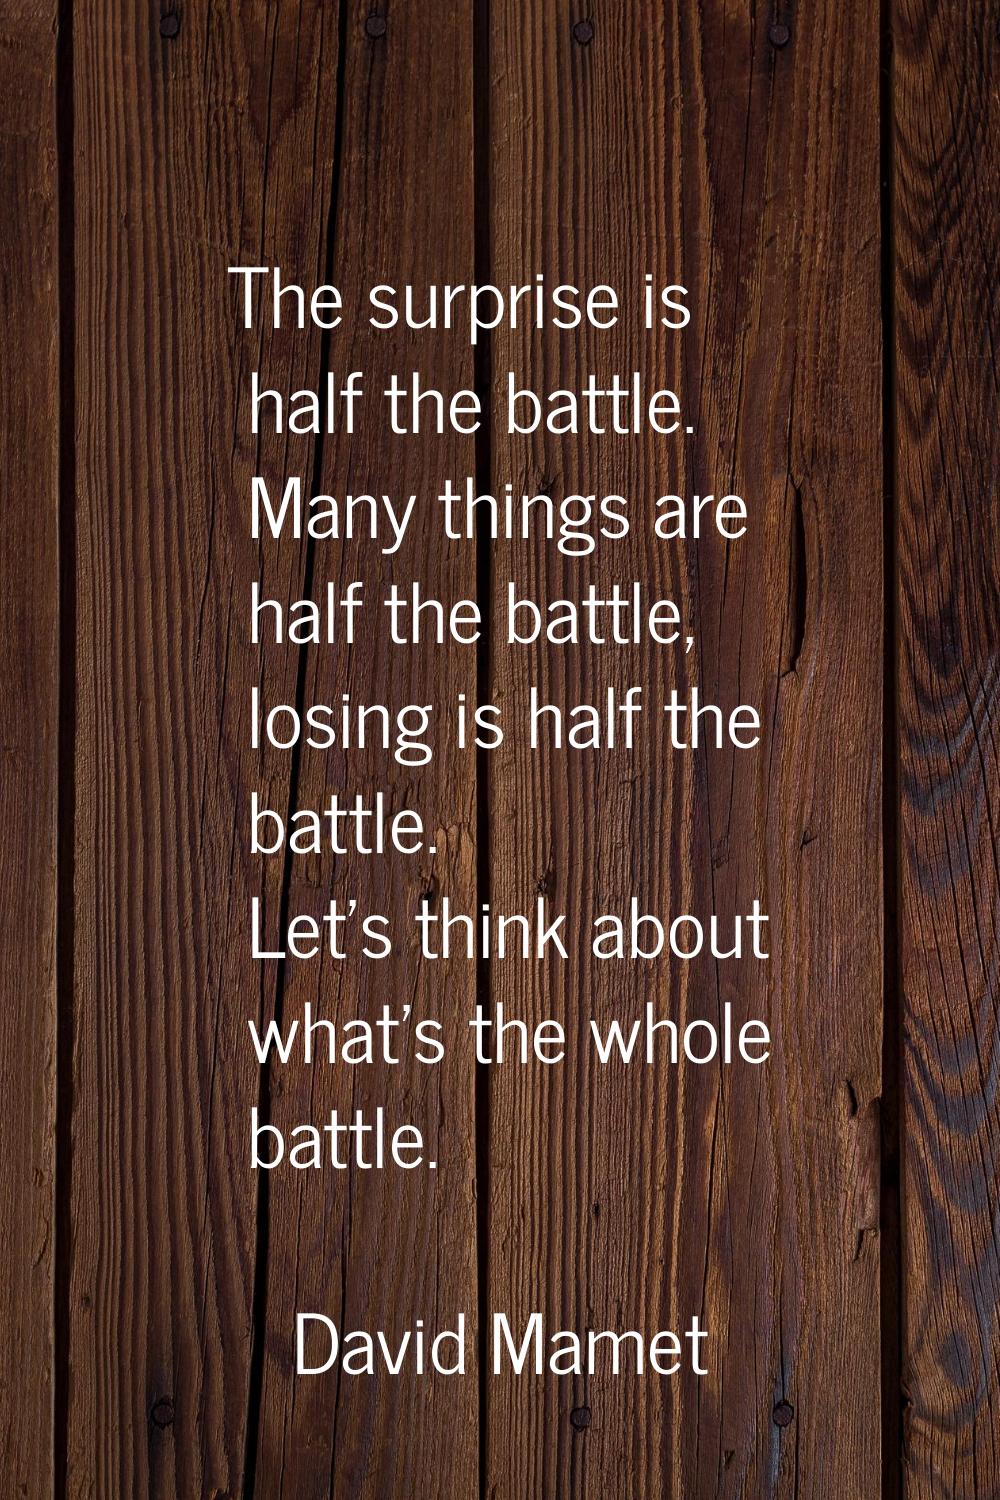 The surprise is half the battle. Many things are half the battle, losing is half the battle. Let's 